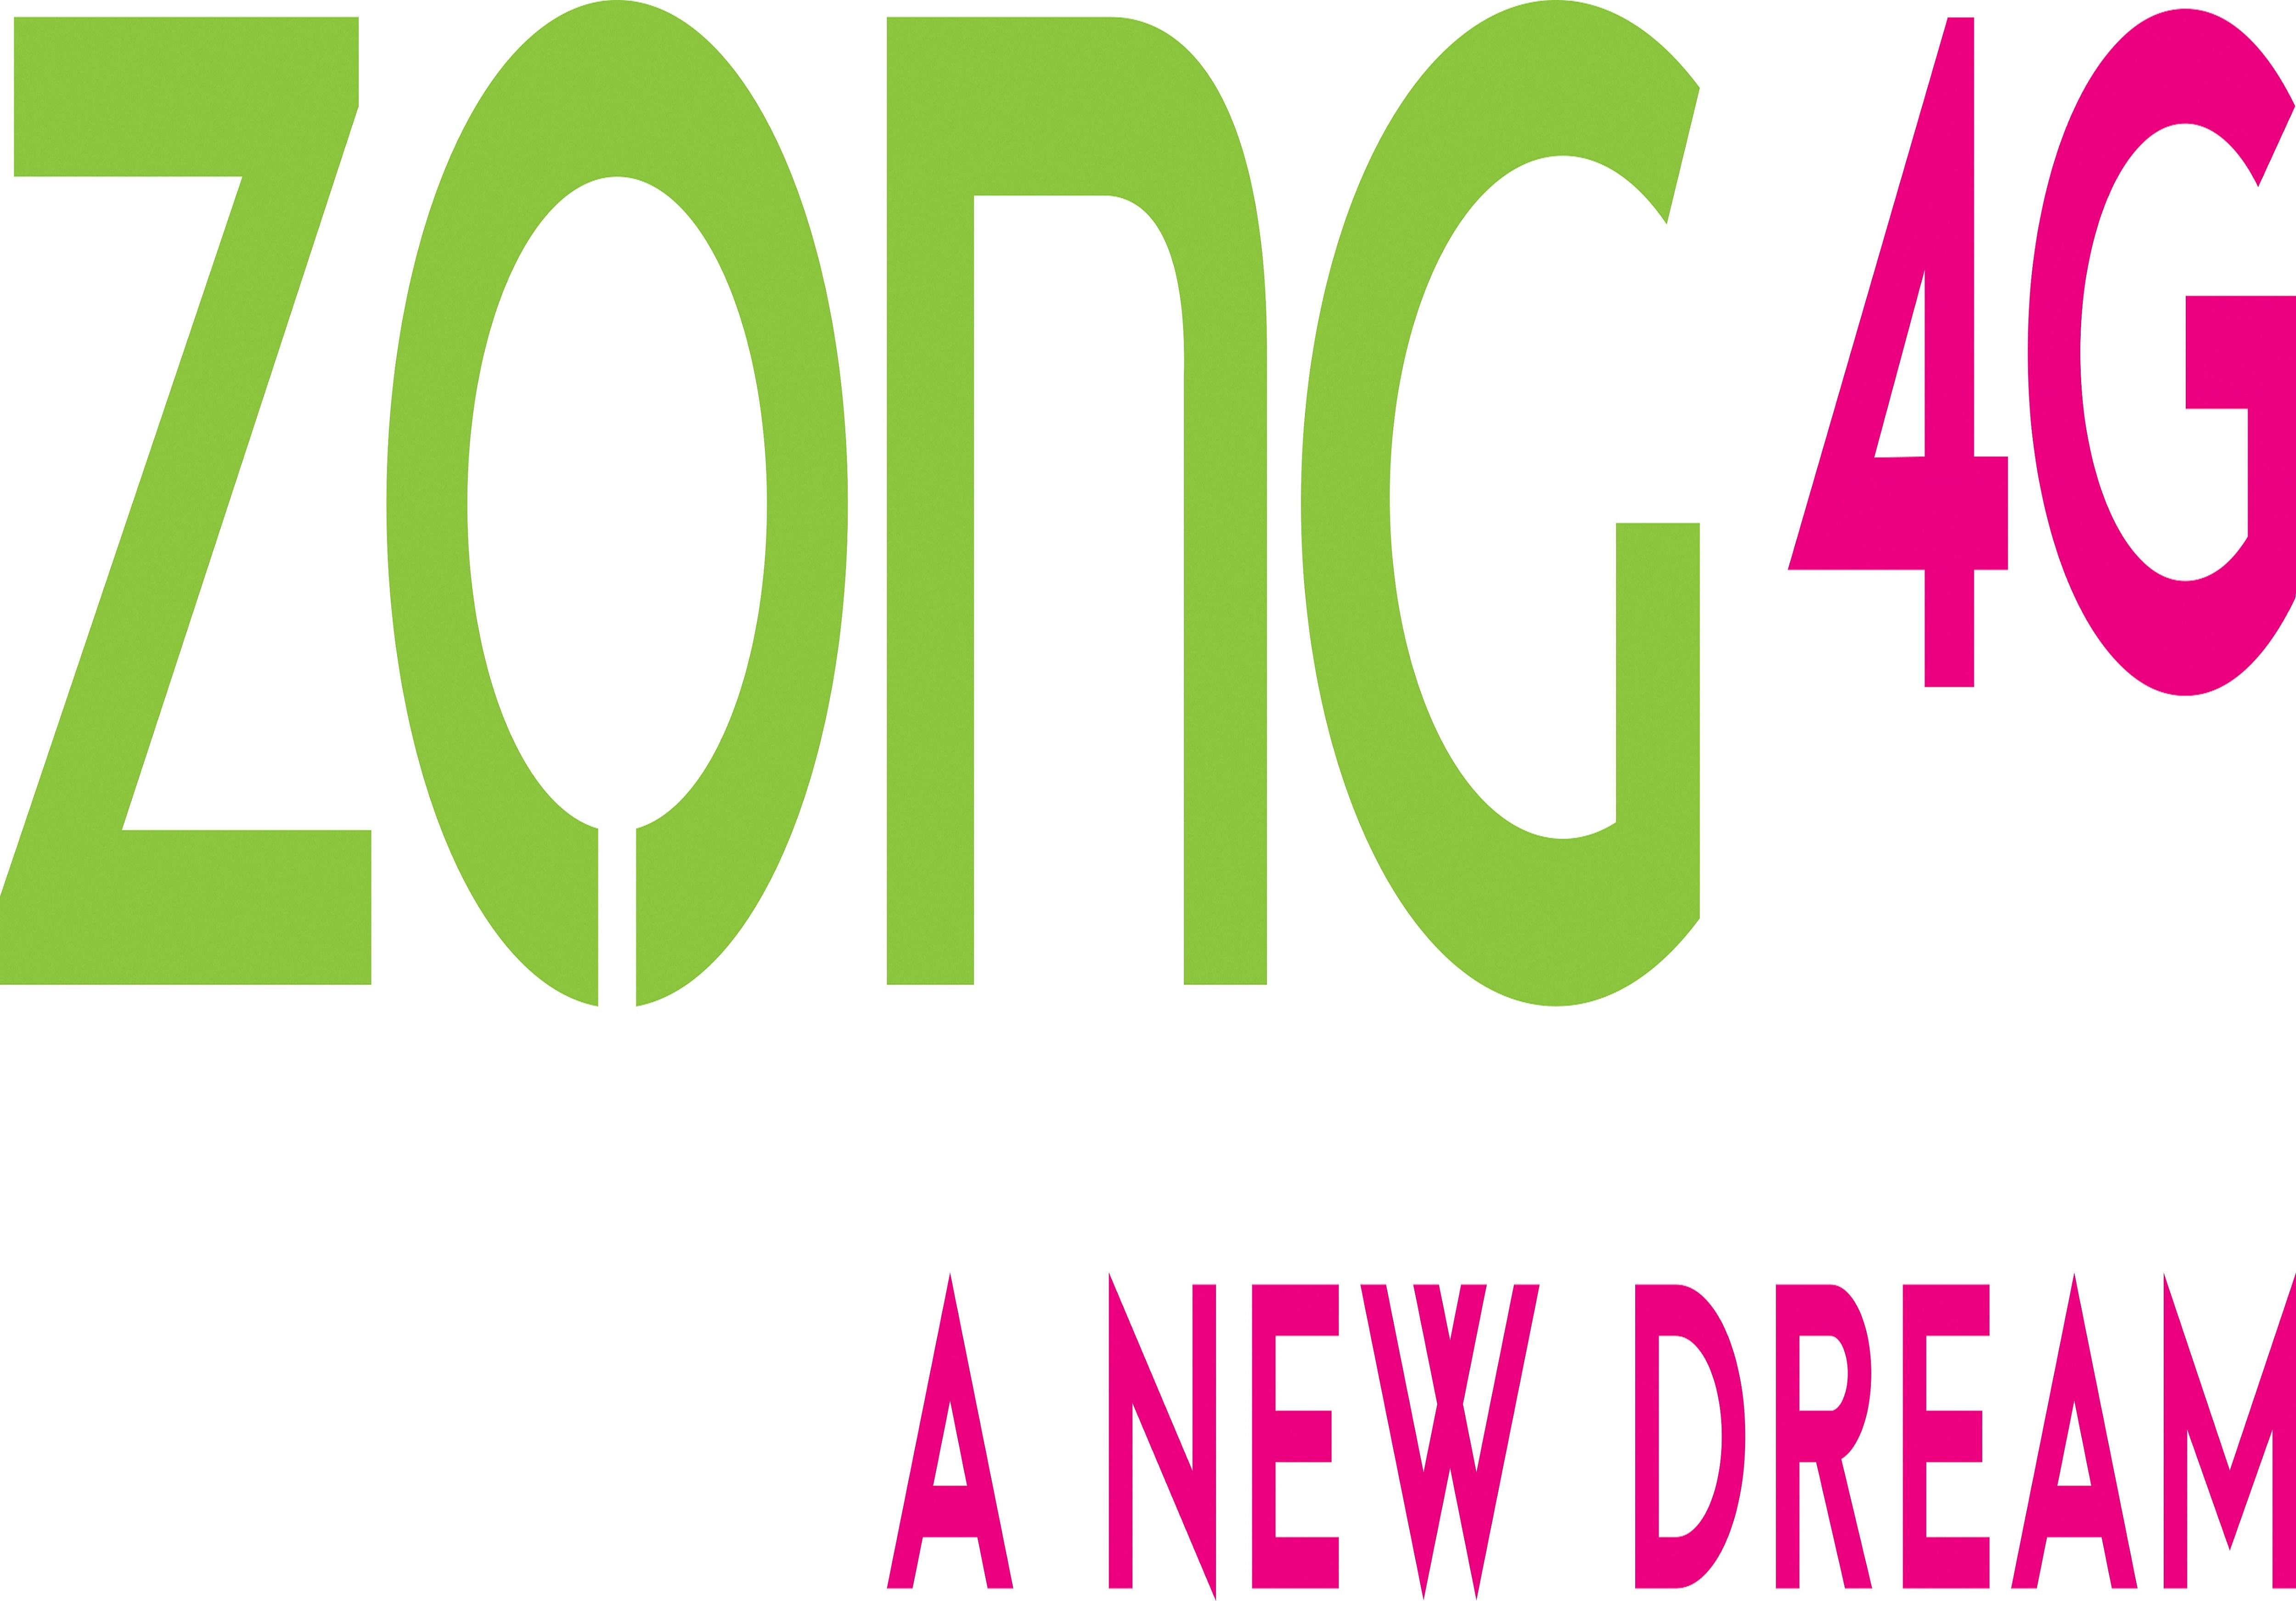 Zong 4G and Huawei Successfully Tested China Mobile’s First FDD Dual-band Massive MIMO (32T32R)